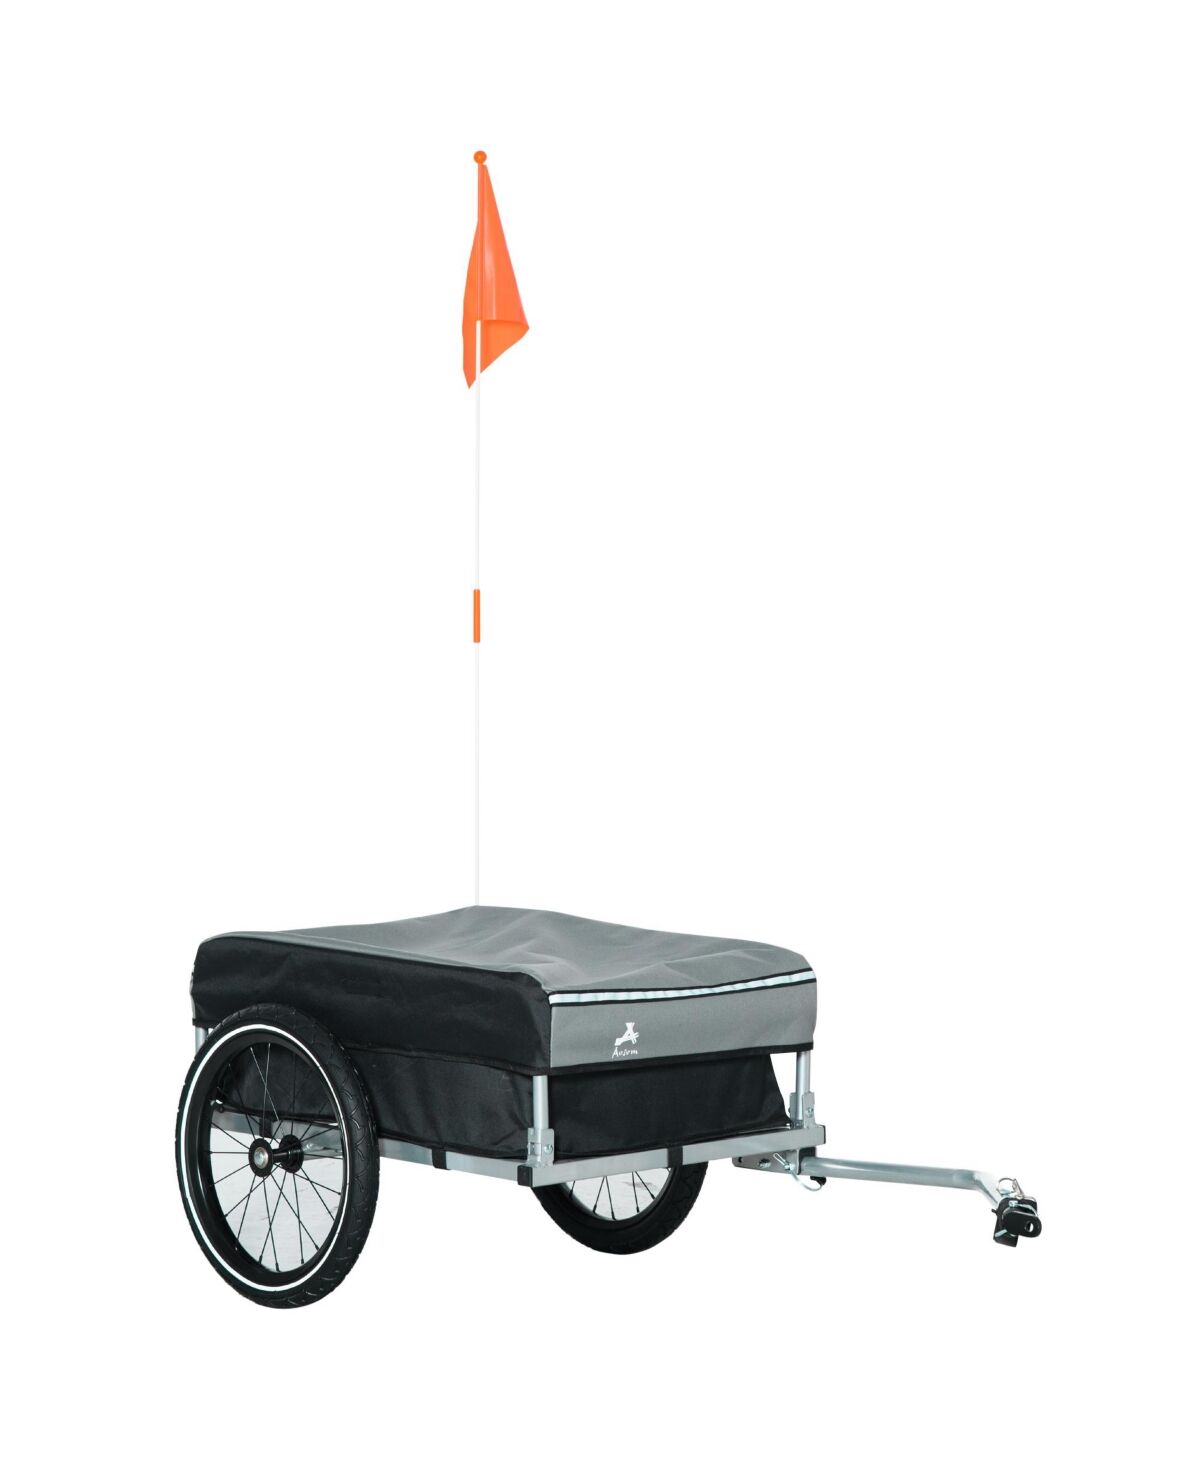 Aosom Bike Cargo Trailer, Foldable Bicycle Trailer, Luggage Wagon with Hitch, Removable Cover, Triple Safety Features and 16'' Wheels - Black and grey